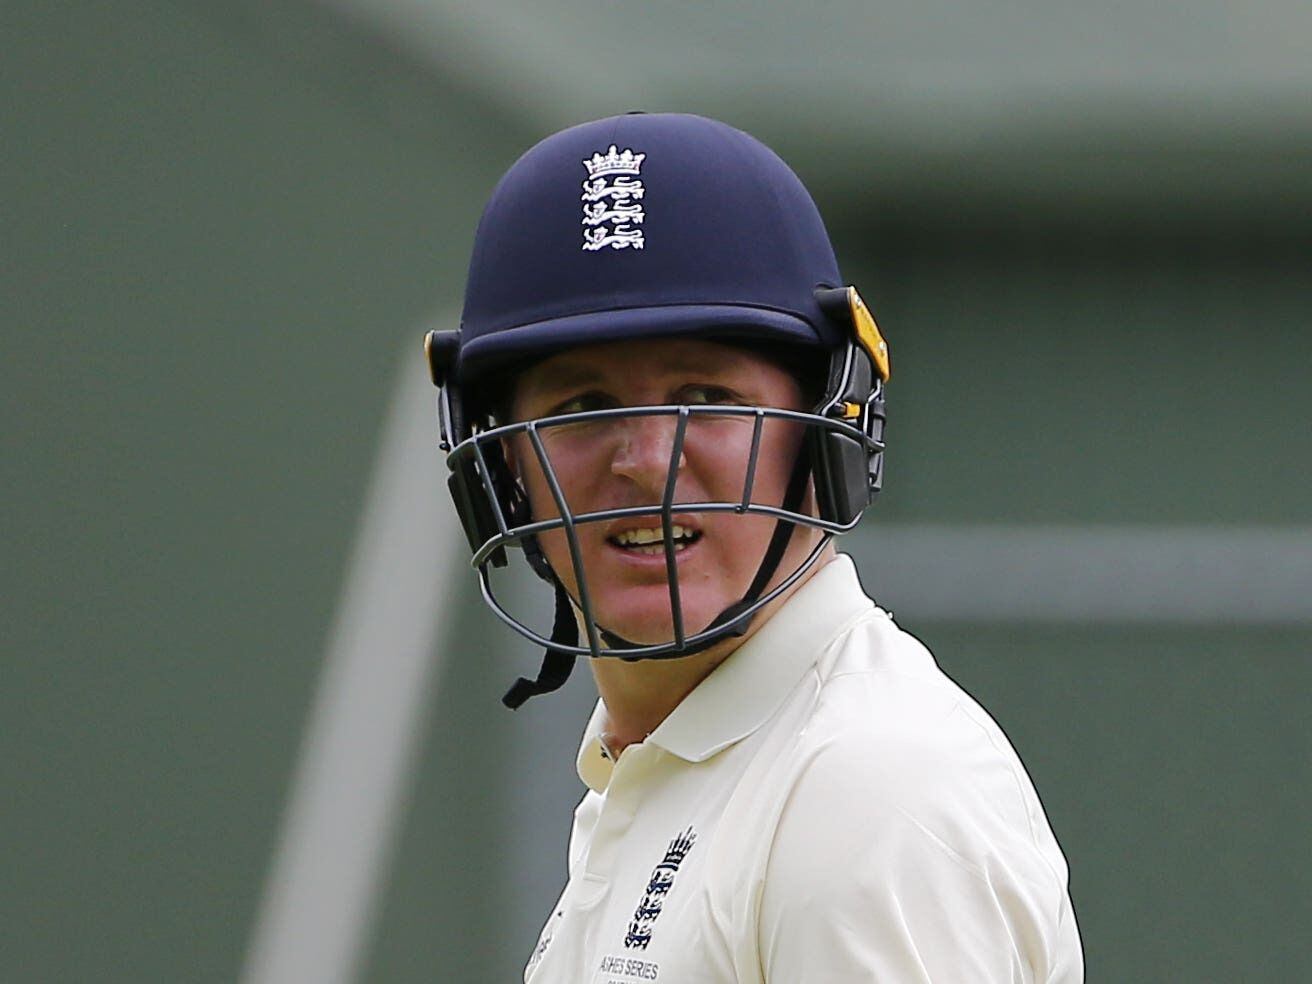 Former England and Yorkshire batter Gary Ballance retires from cricket